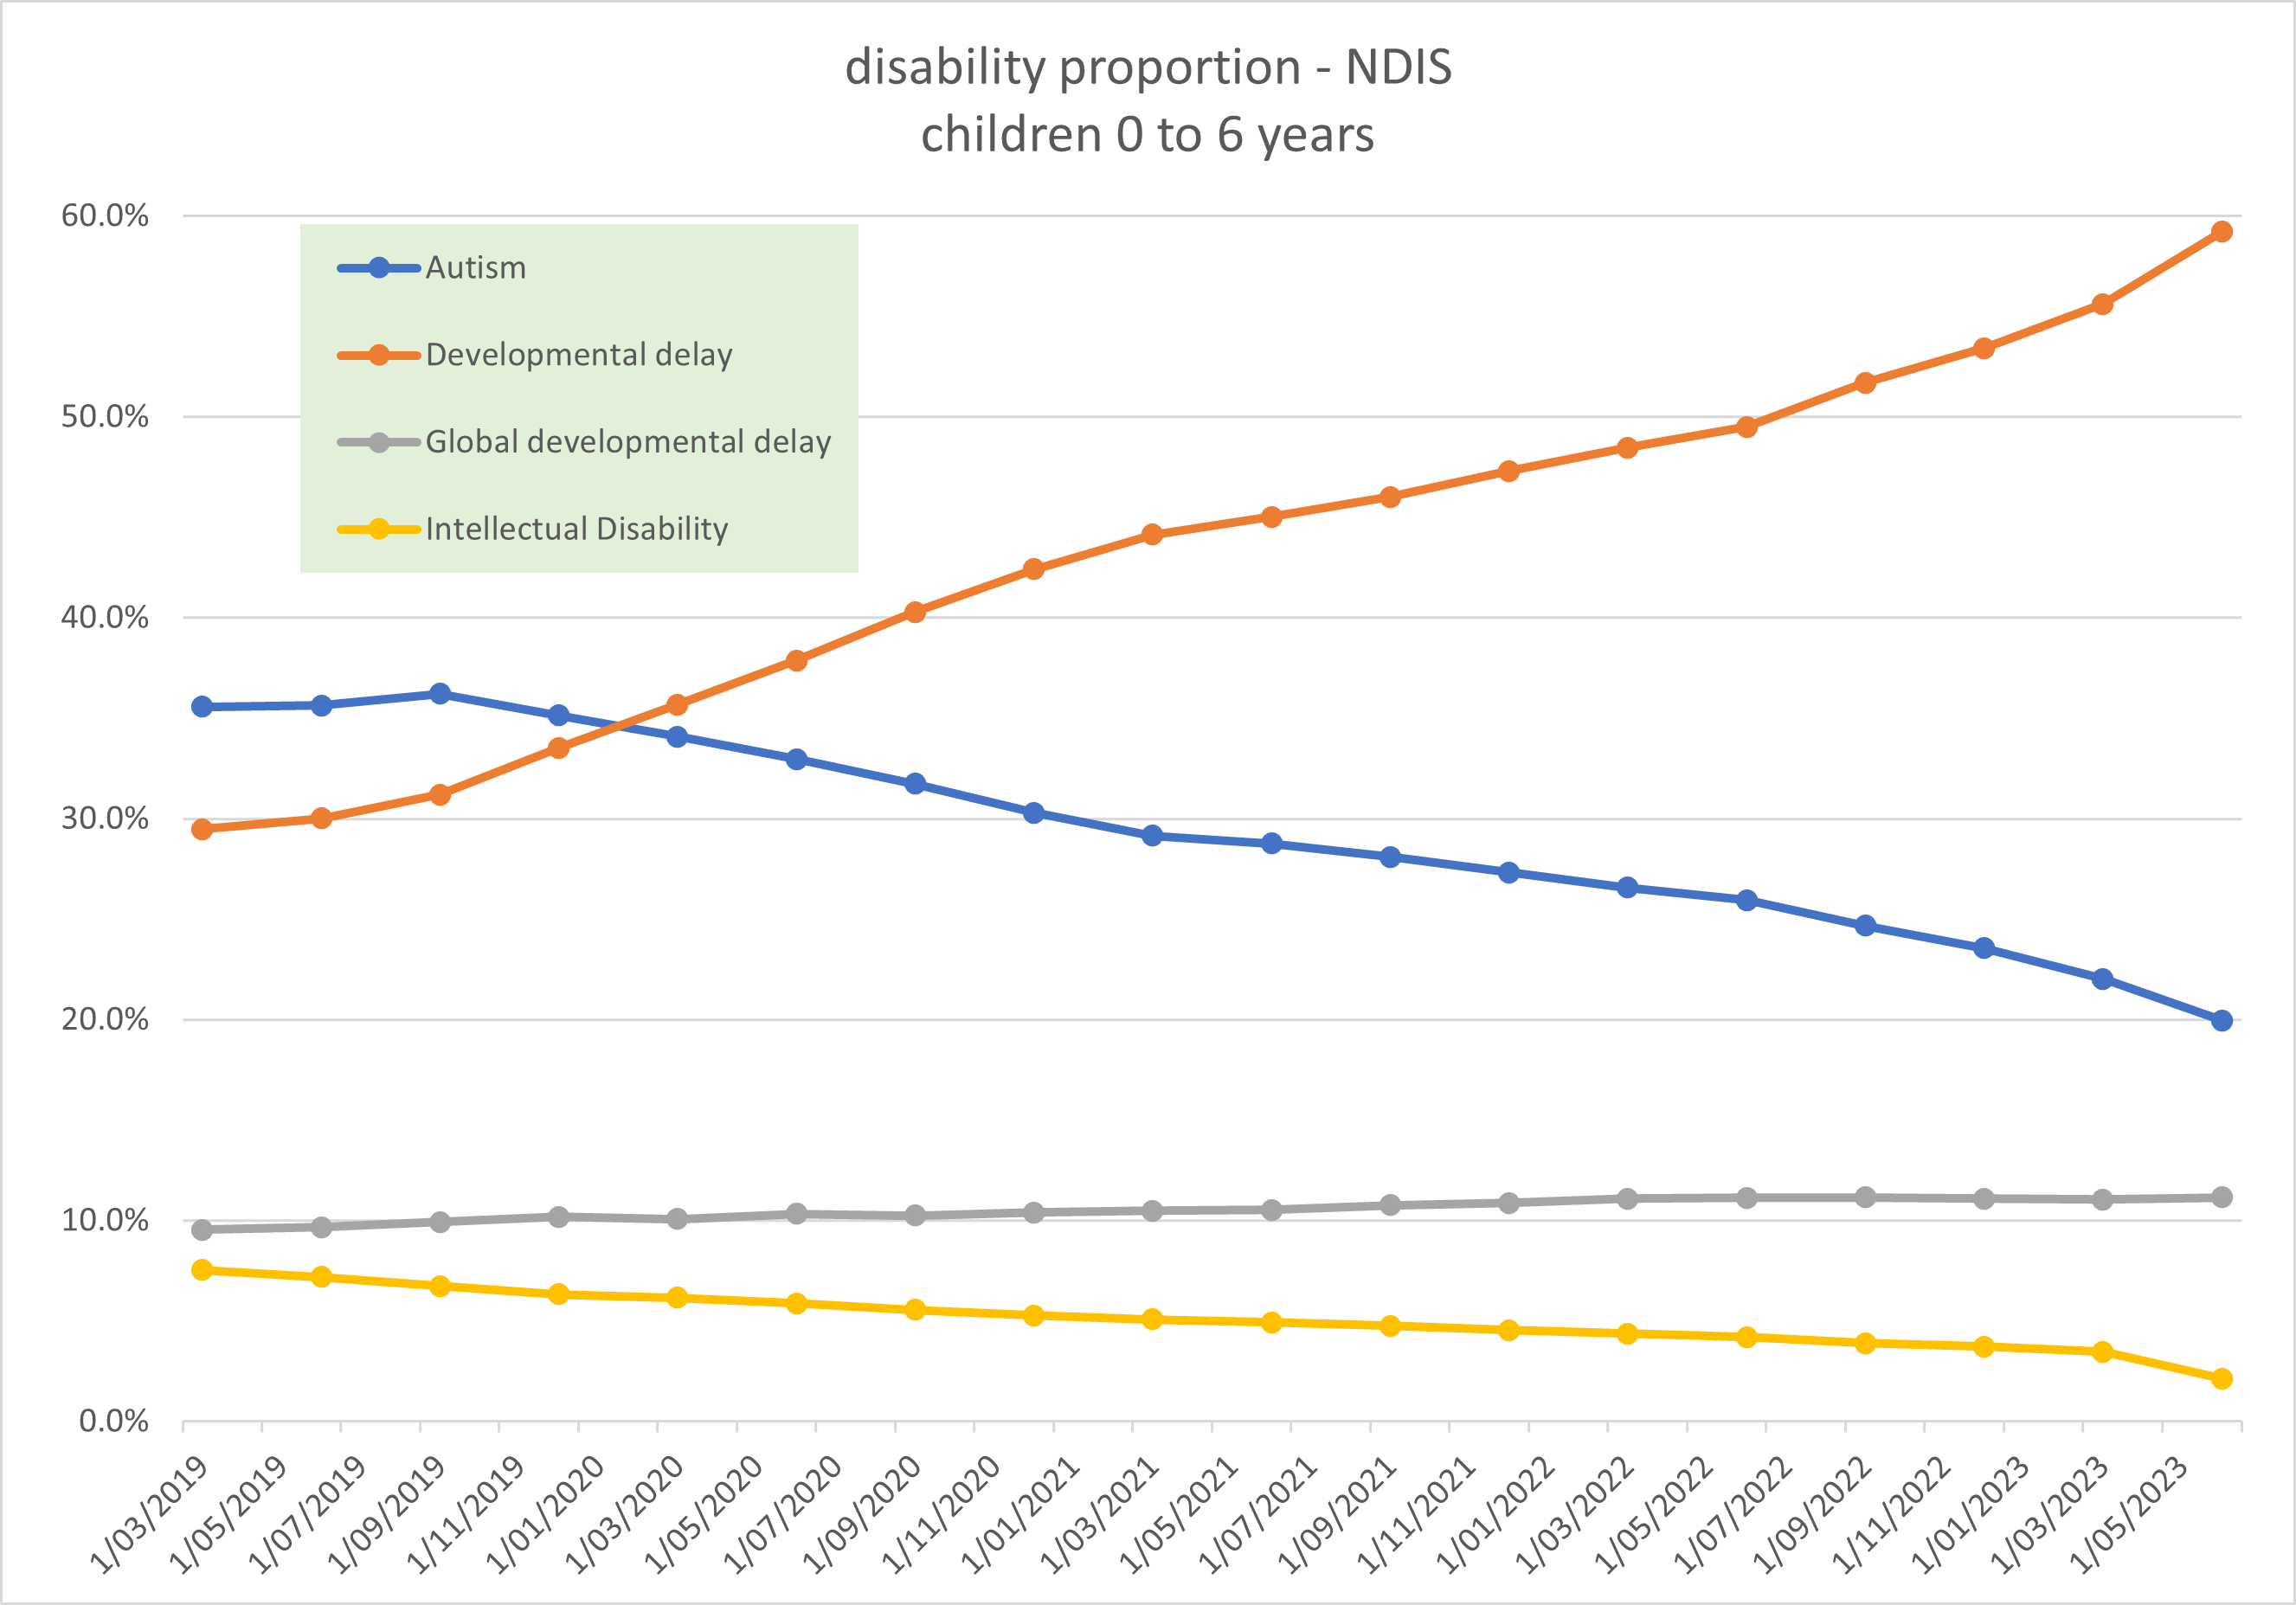 graph showing Developmental delay, Global developmental delay, Autism and Intellectual Disability from 2019 to 2023. Autism drops from 35.6% to 19.9%, GDD rises from 9.5% to 11.2%, ID drops from 7.5% to 2.1% and DD rises from 29.5% to 59.2%.